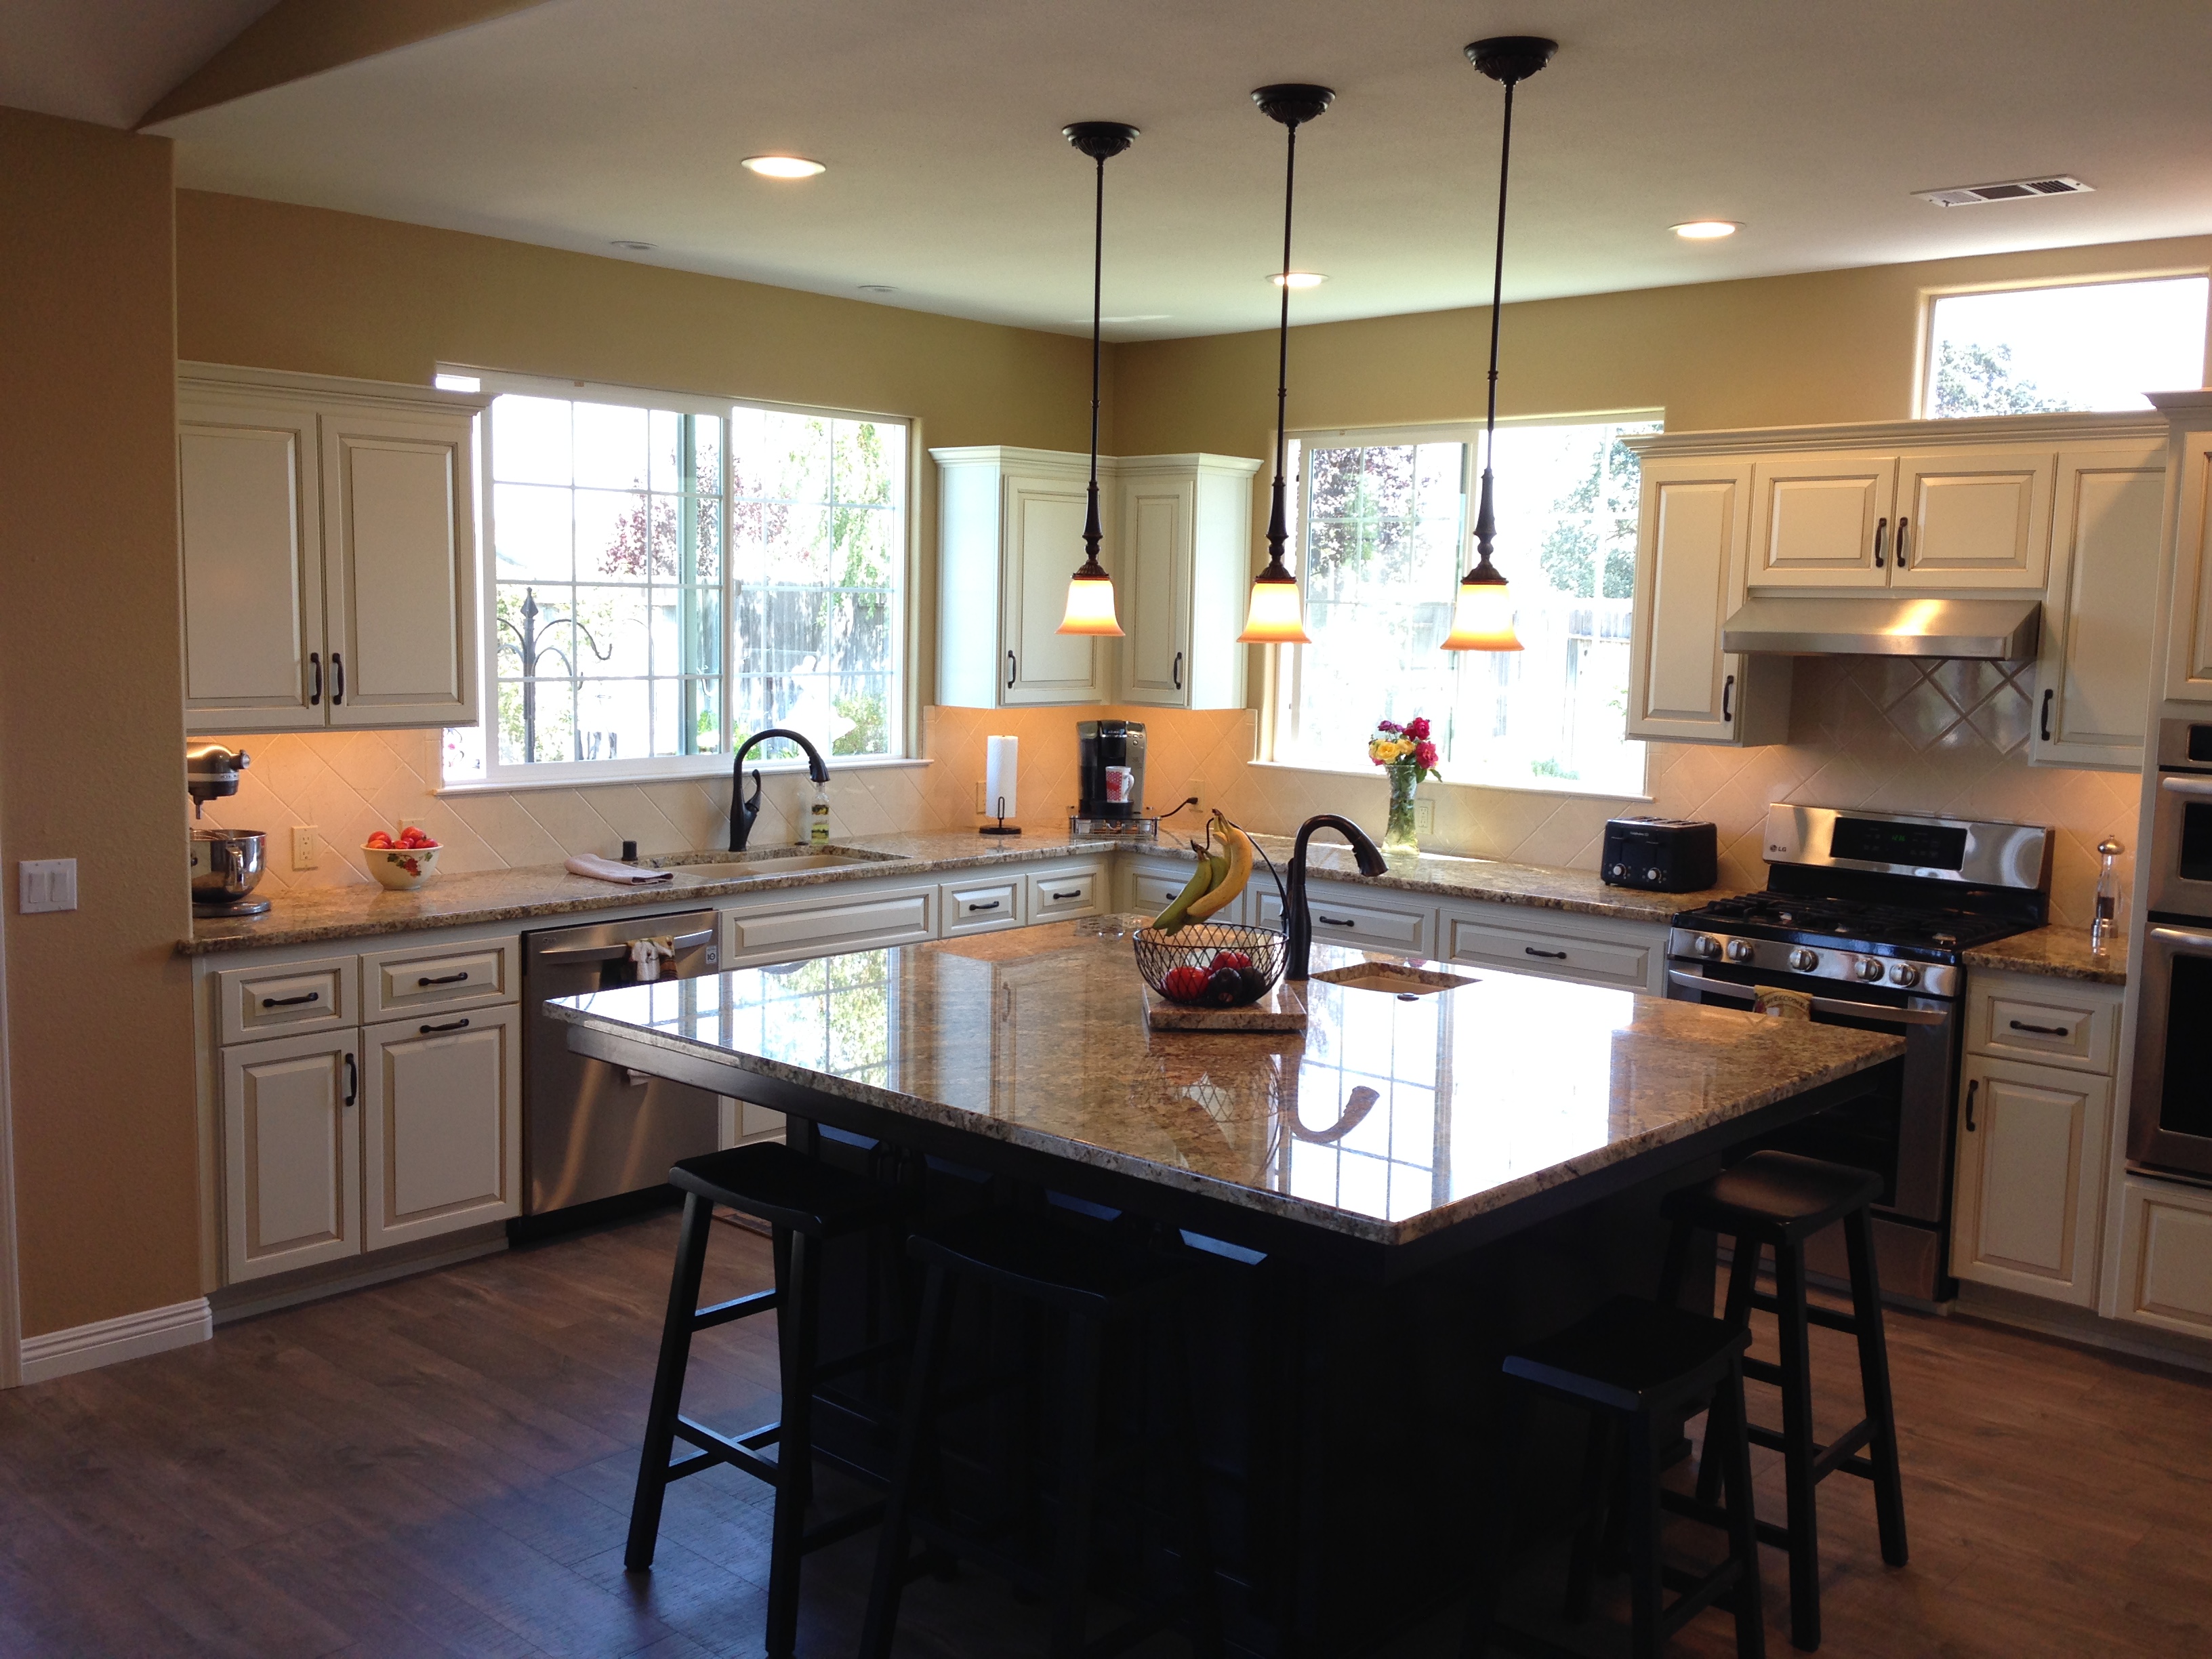 Morro Bay Cabinets Family Owned Since 1974 Custom Cabinetry And